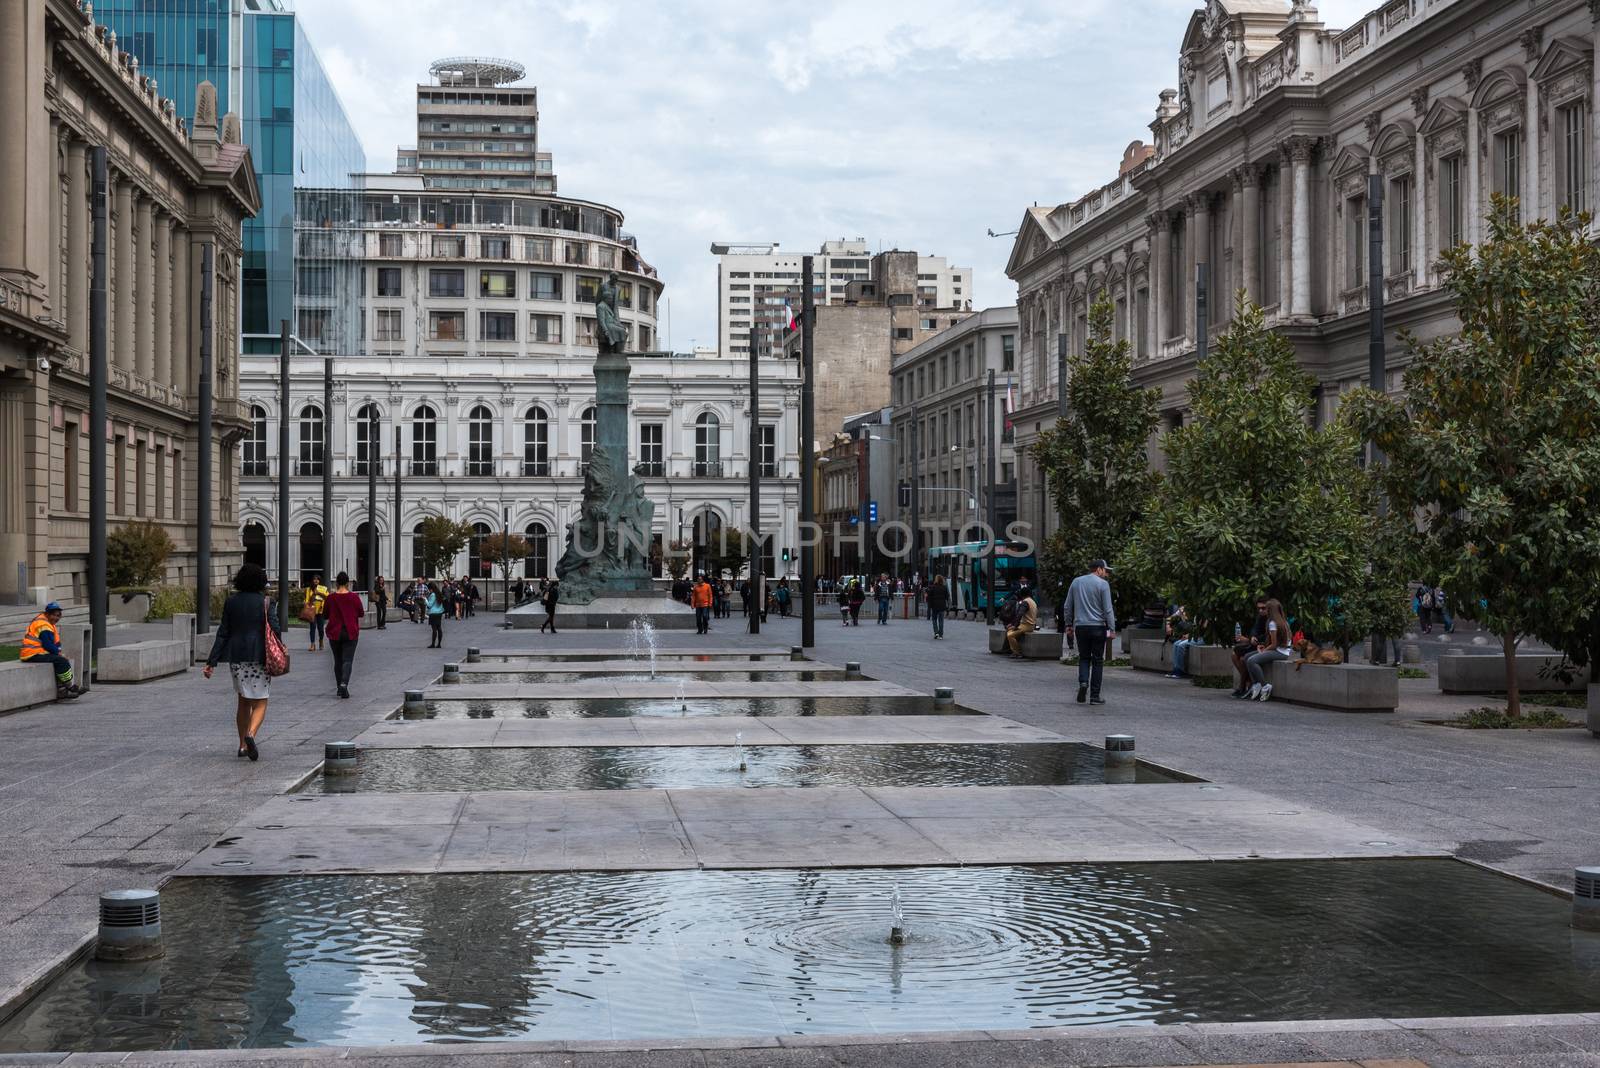 Santiago, Chile--April 6, 2018.  People are walking along wide open plaza with classical architecture on a street in Santiago, Chile.